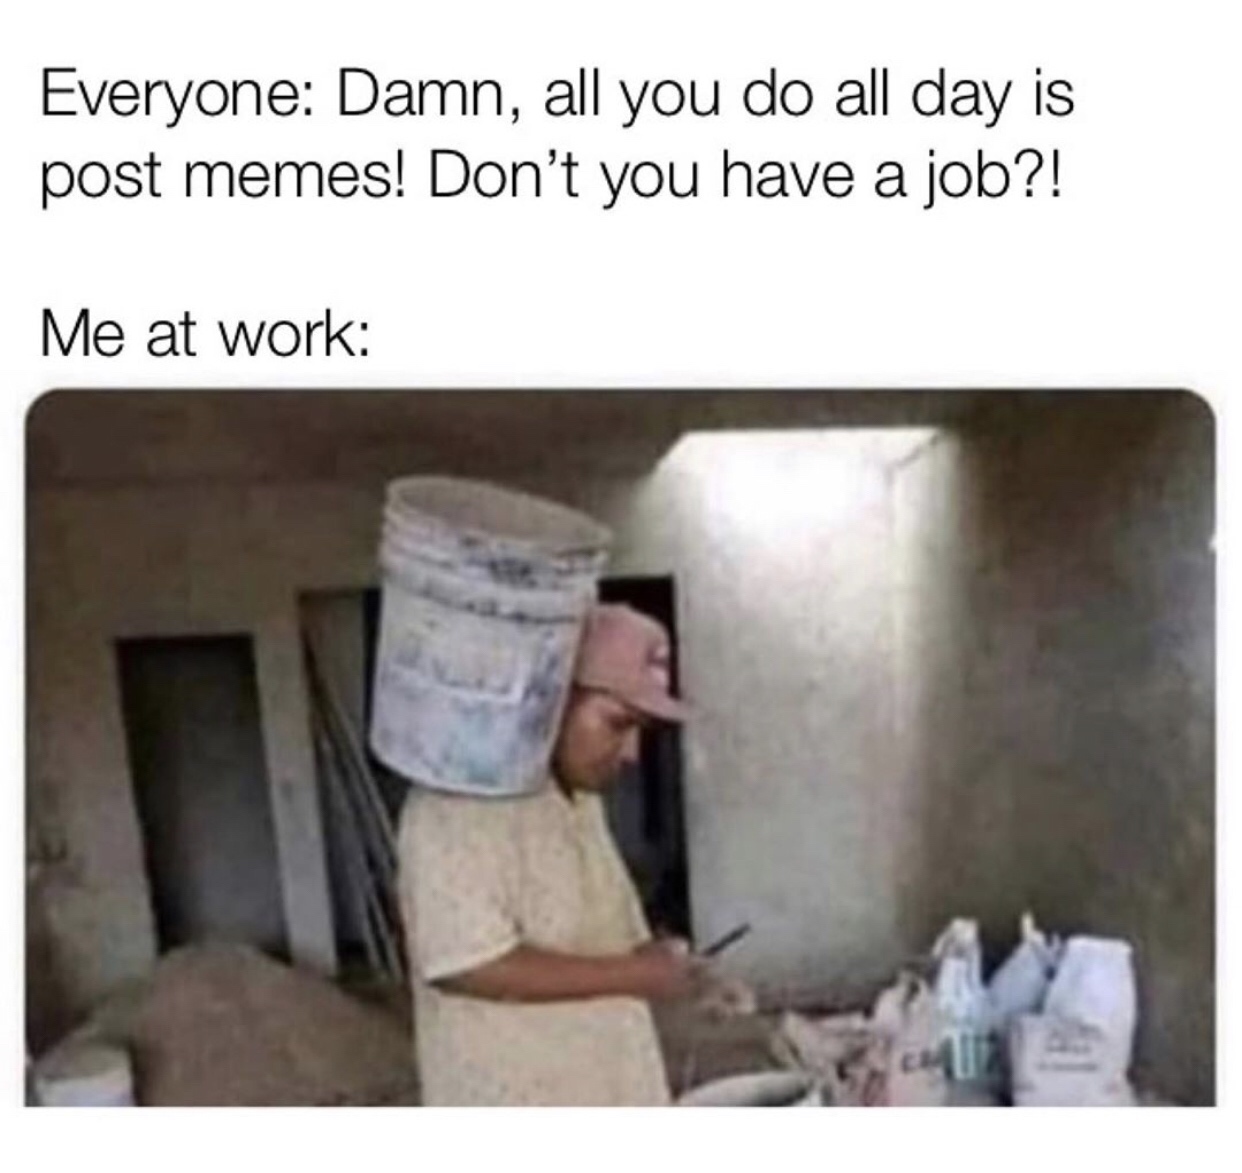 dank memes - funny memes - all you do is post memes all day - Everyone Damn, all you do all day is post memes! Don't you have a job?! a Me at work